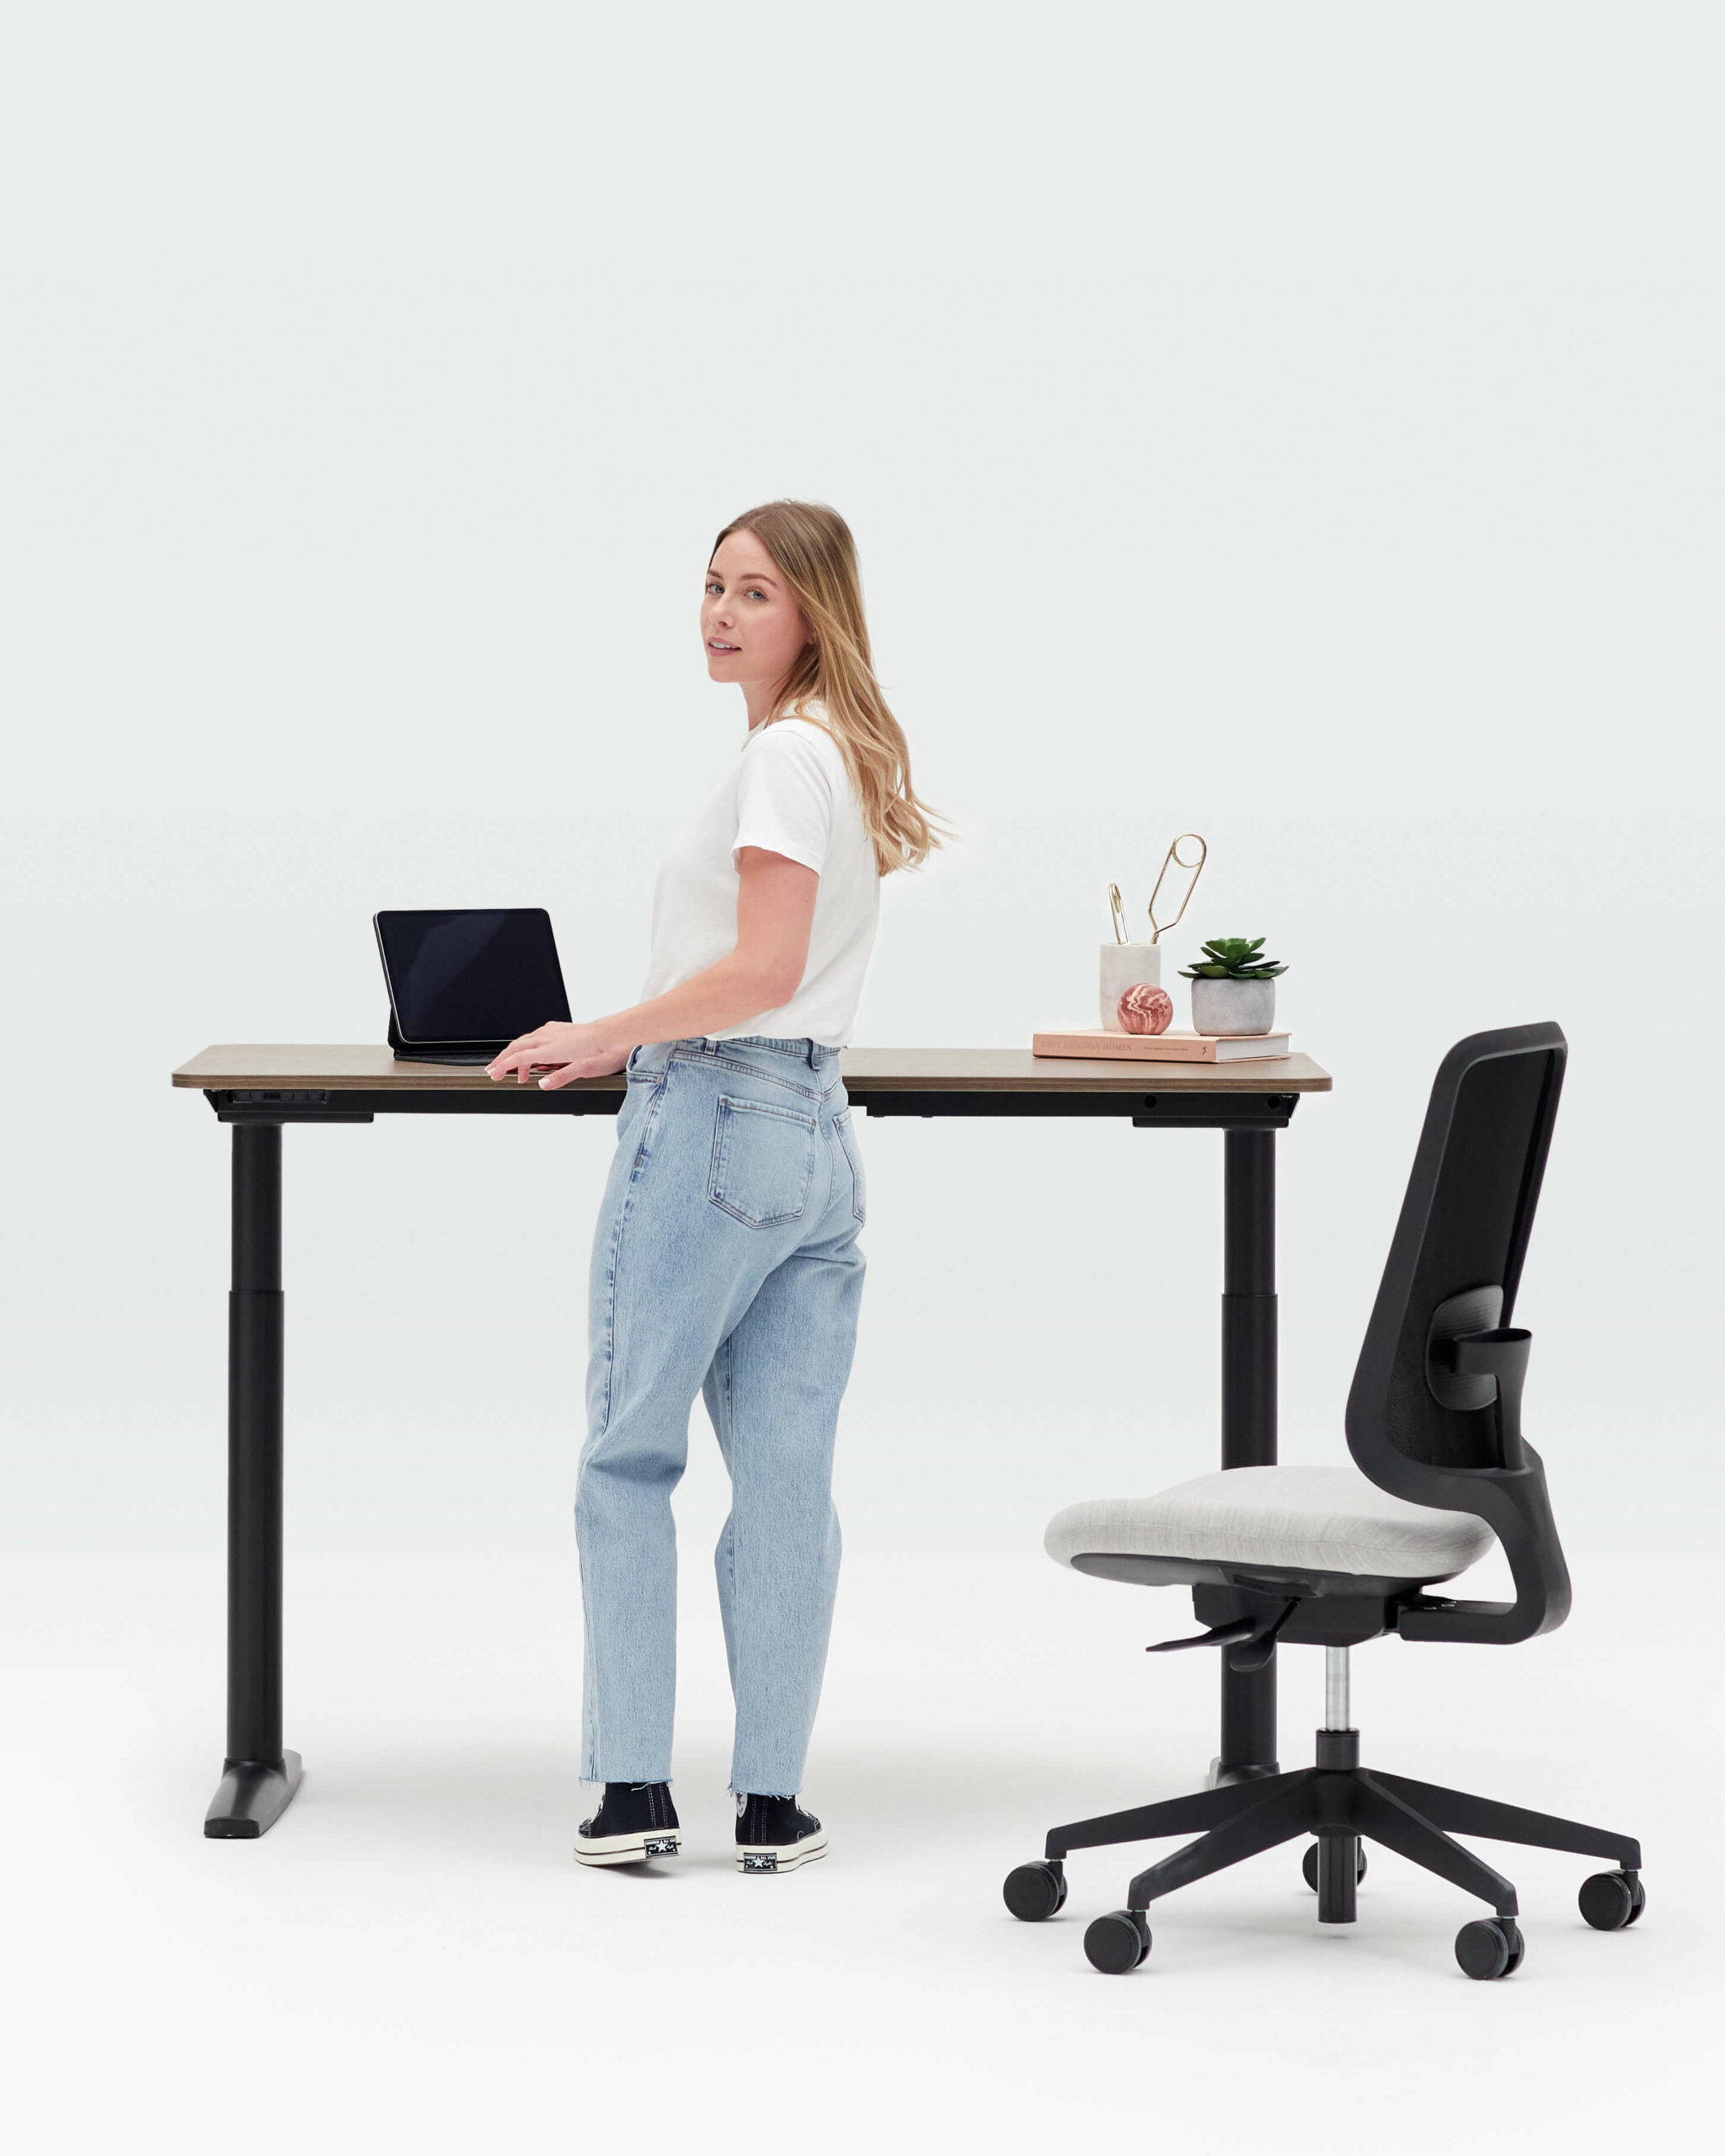 Rotated Person Looking Towards You Whilst Using a Laptop at a Height Adjustable Desk